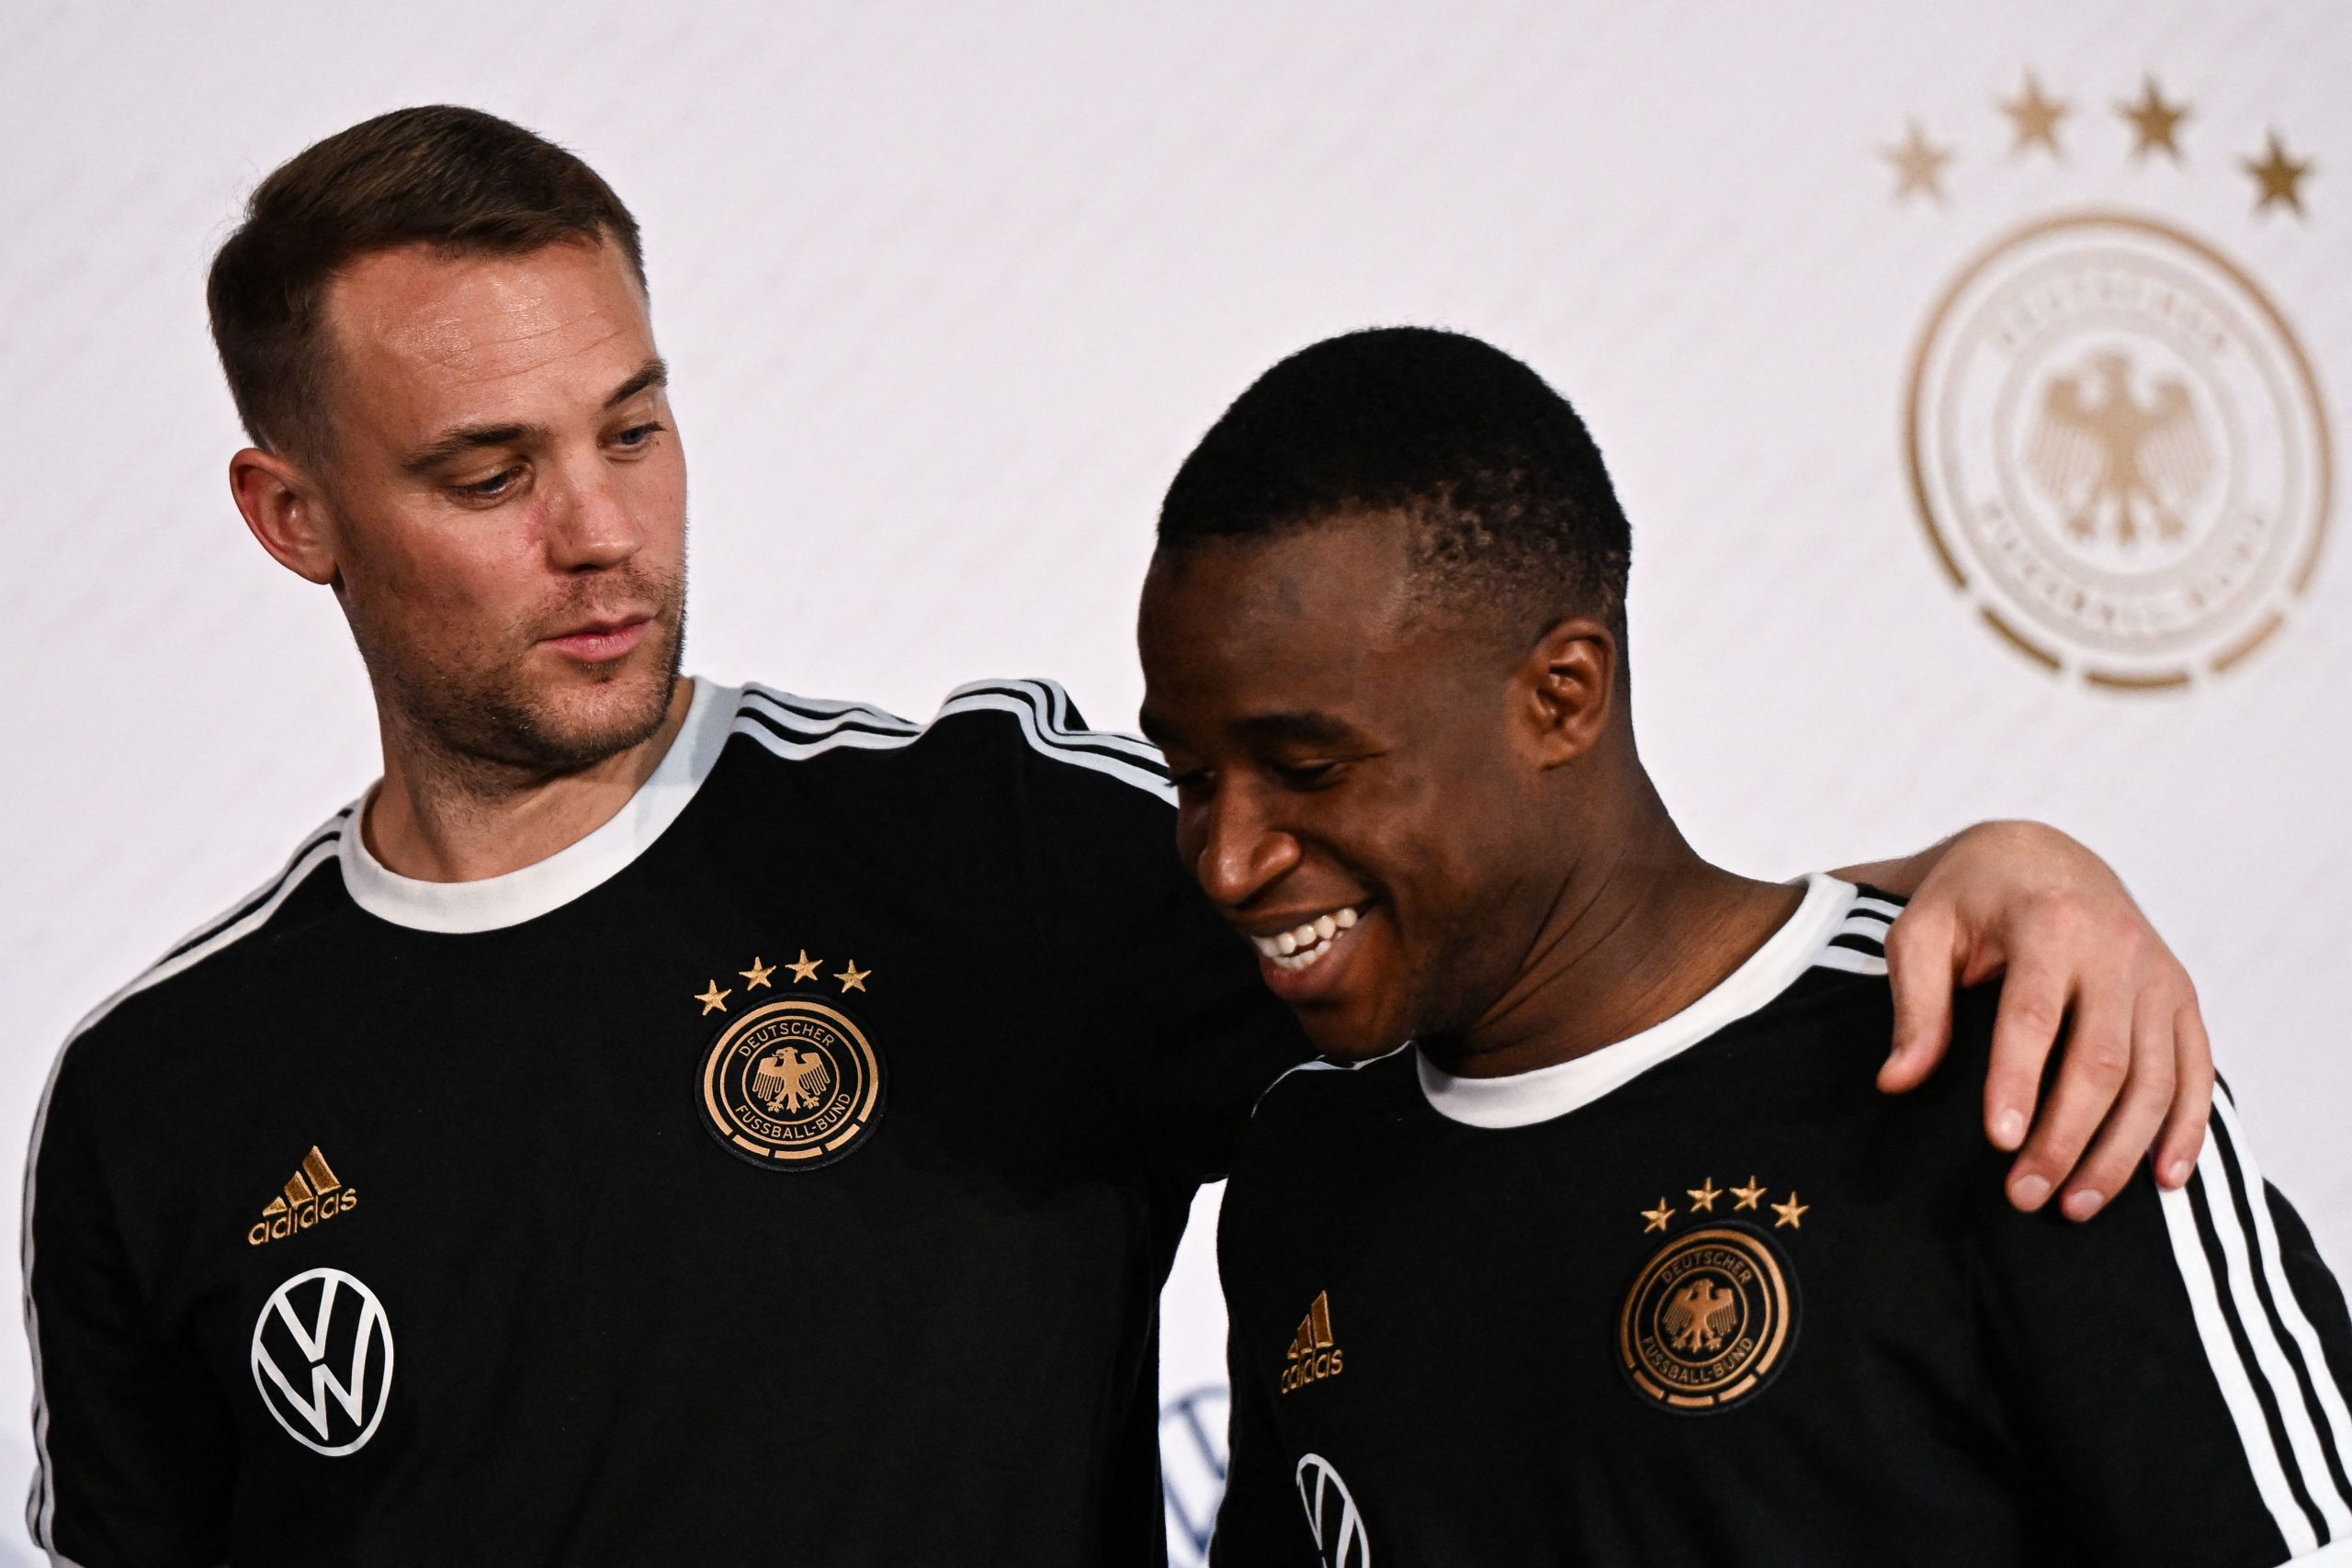 Germany's goalkeeper Manuel Neuer (L) and Germany's forward Youssoufa Moukoko leave after holding a press conference at Al Shamal Stadium in Al Shamal, north of Doha, on November 19, 2022, ahead of the Qatar 2022 World Cup football tournament. (Photo by Ina FASSBENDER / AFP) (Photo by INA FASSBENDER/AFP via Getty Images)